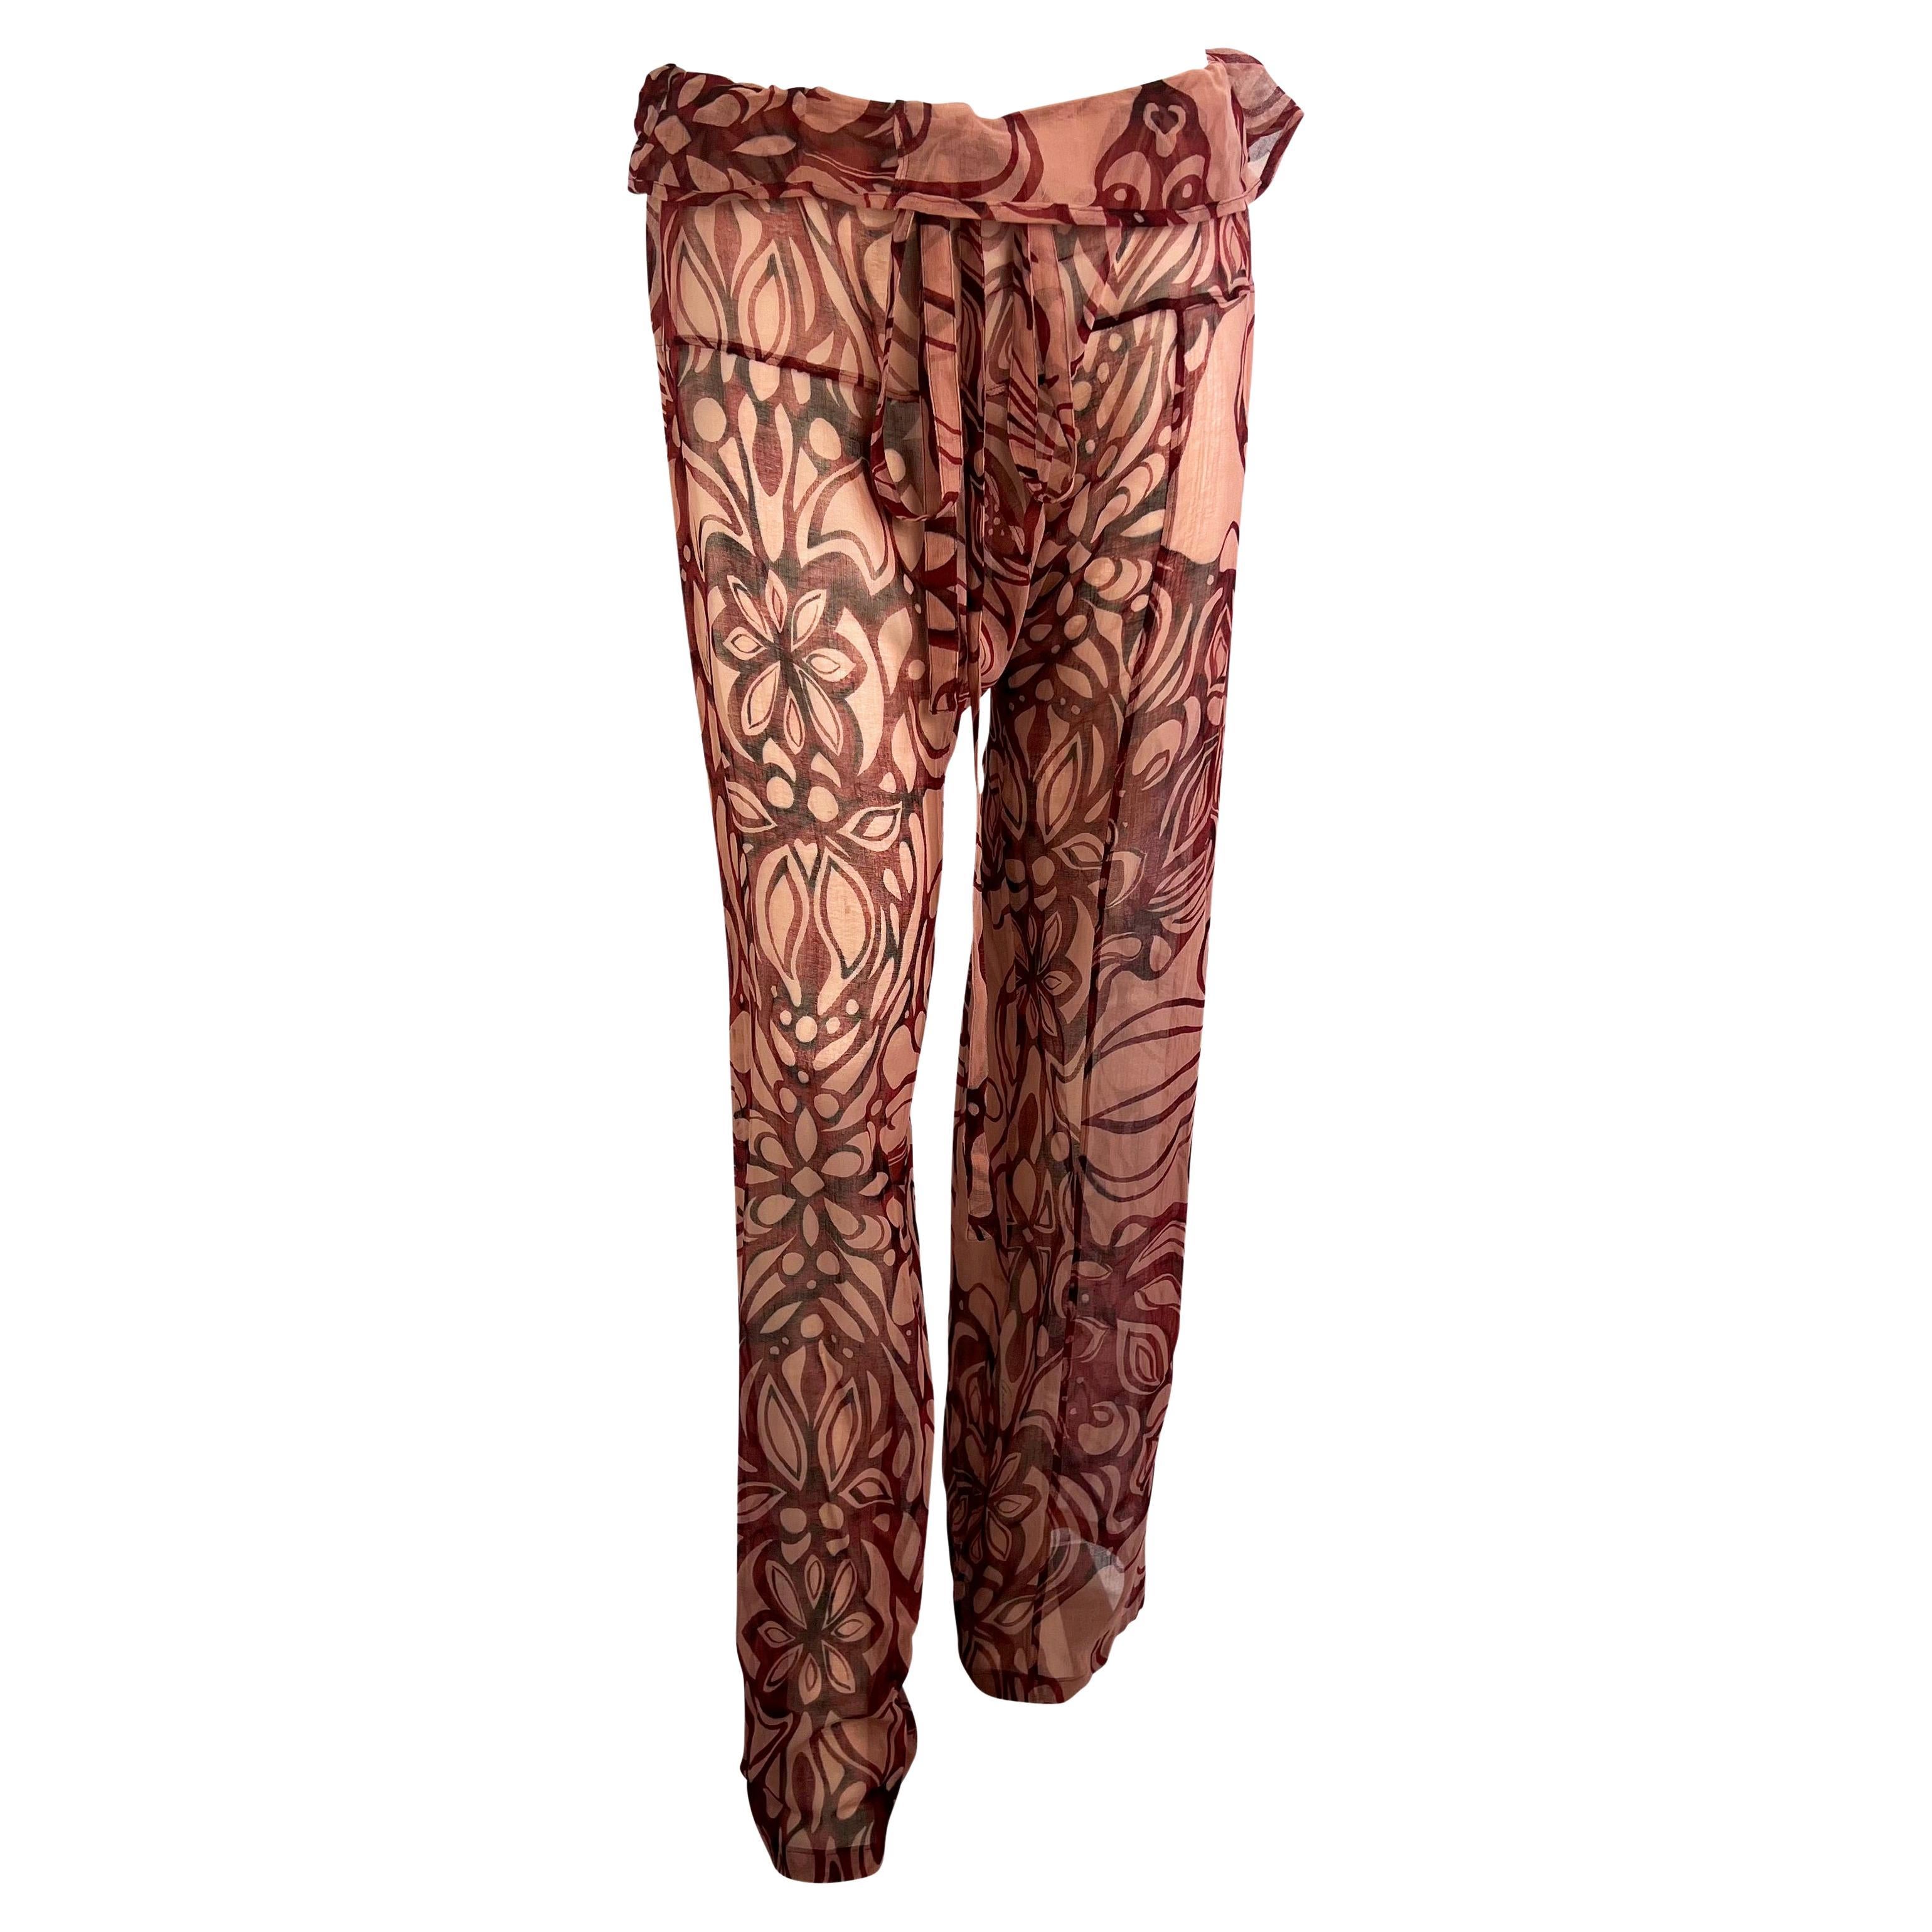 S/S 2002 Gucci by Tom Ford Sheer Floral Tattoo Beach Coverup Pant Set NWT In Excellent Condition For Sale In West Hollywood, CA